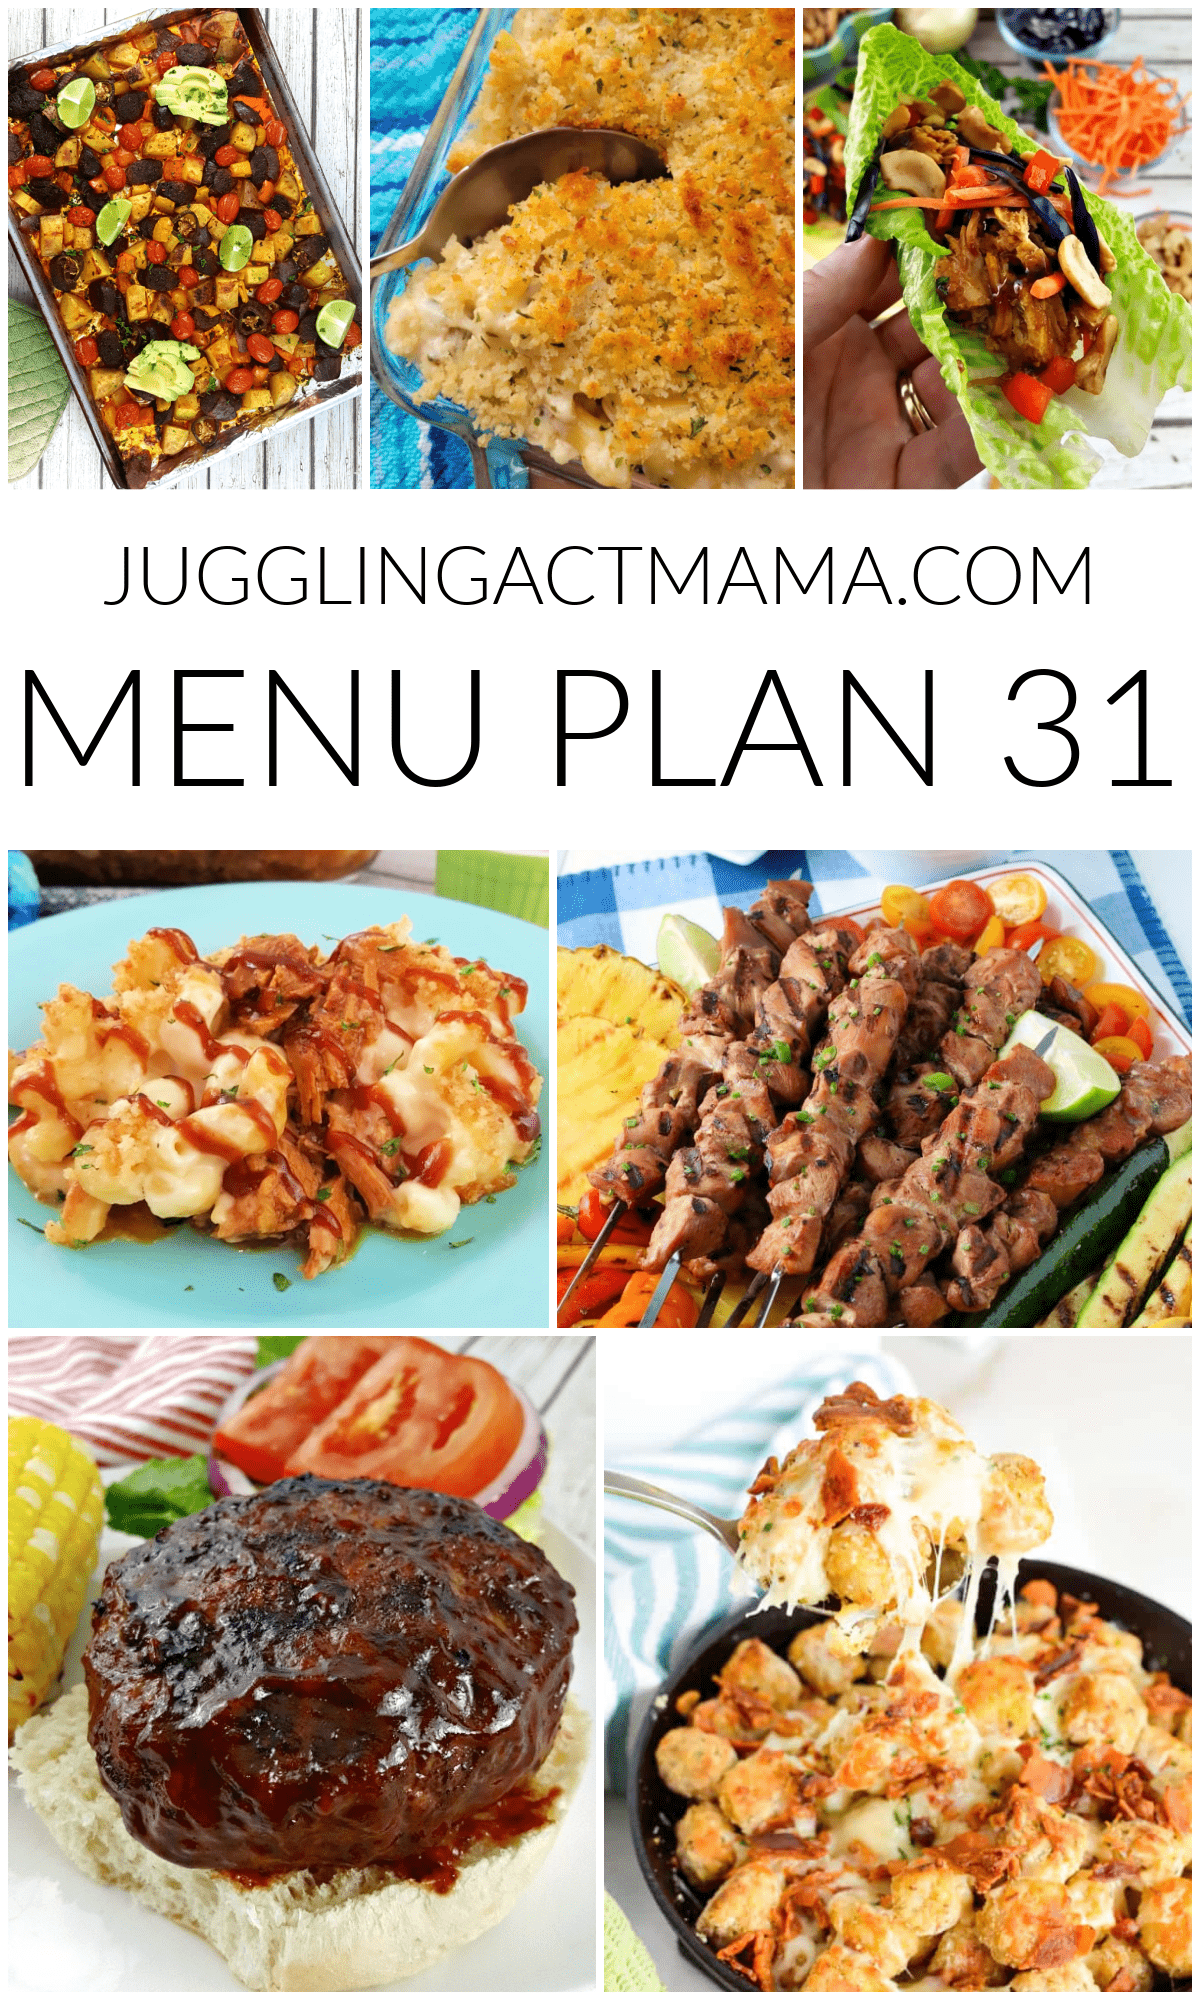 MEAL PLAN 31 collage image with text.